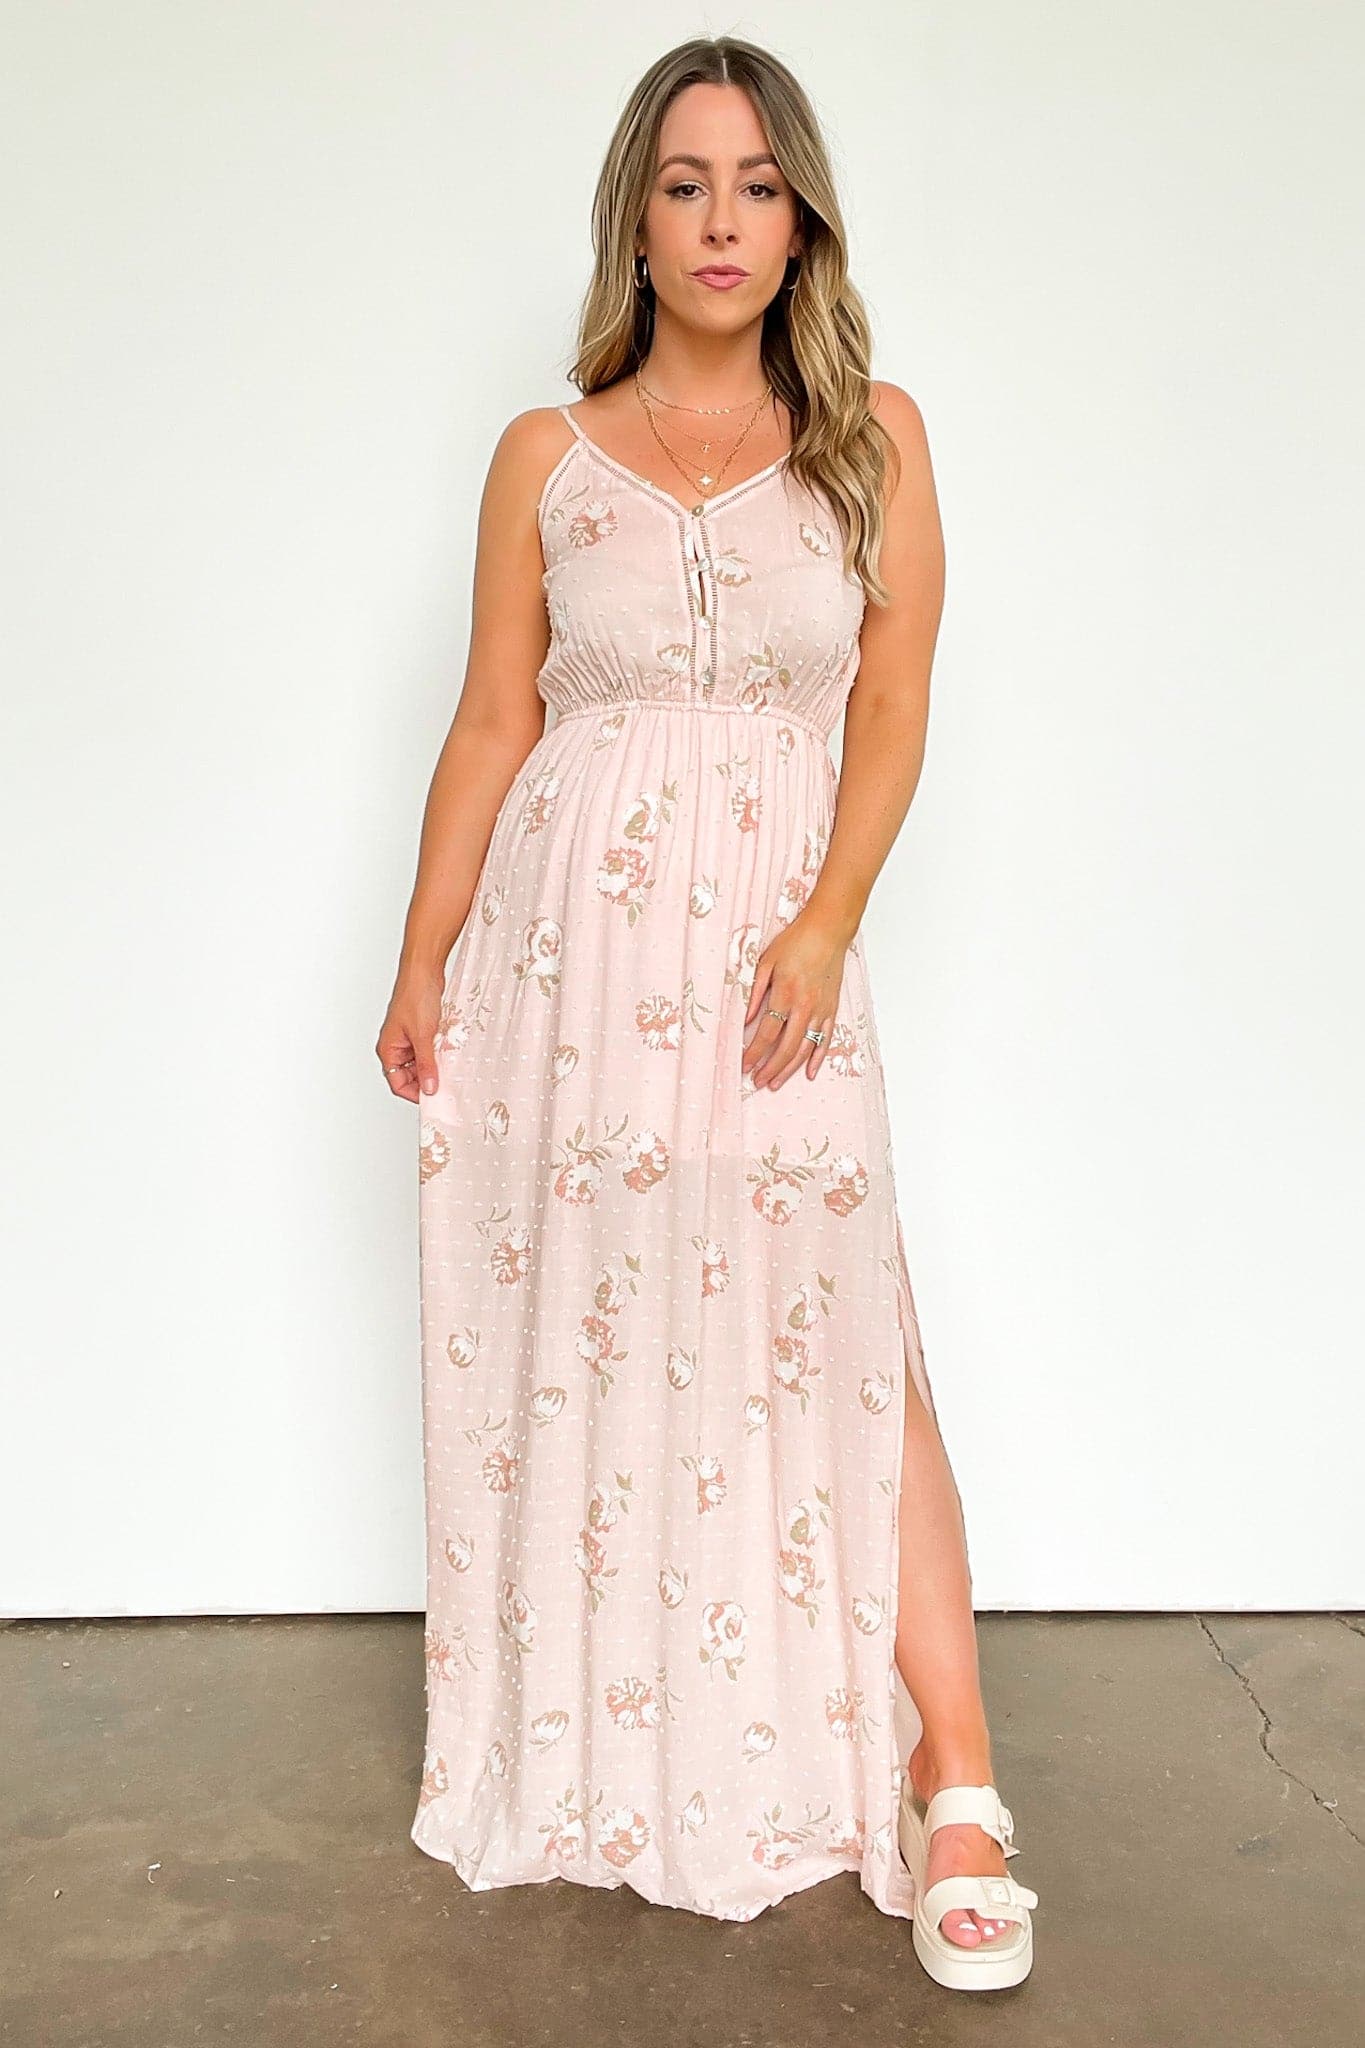  Charming Aesthetic Floral Swiss Dot Maxi Dress - FINAL SALE - Madison and Mallory